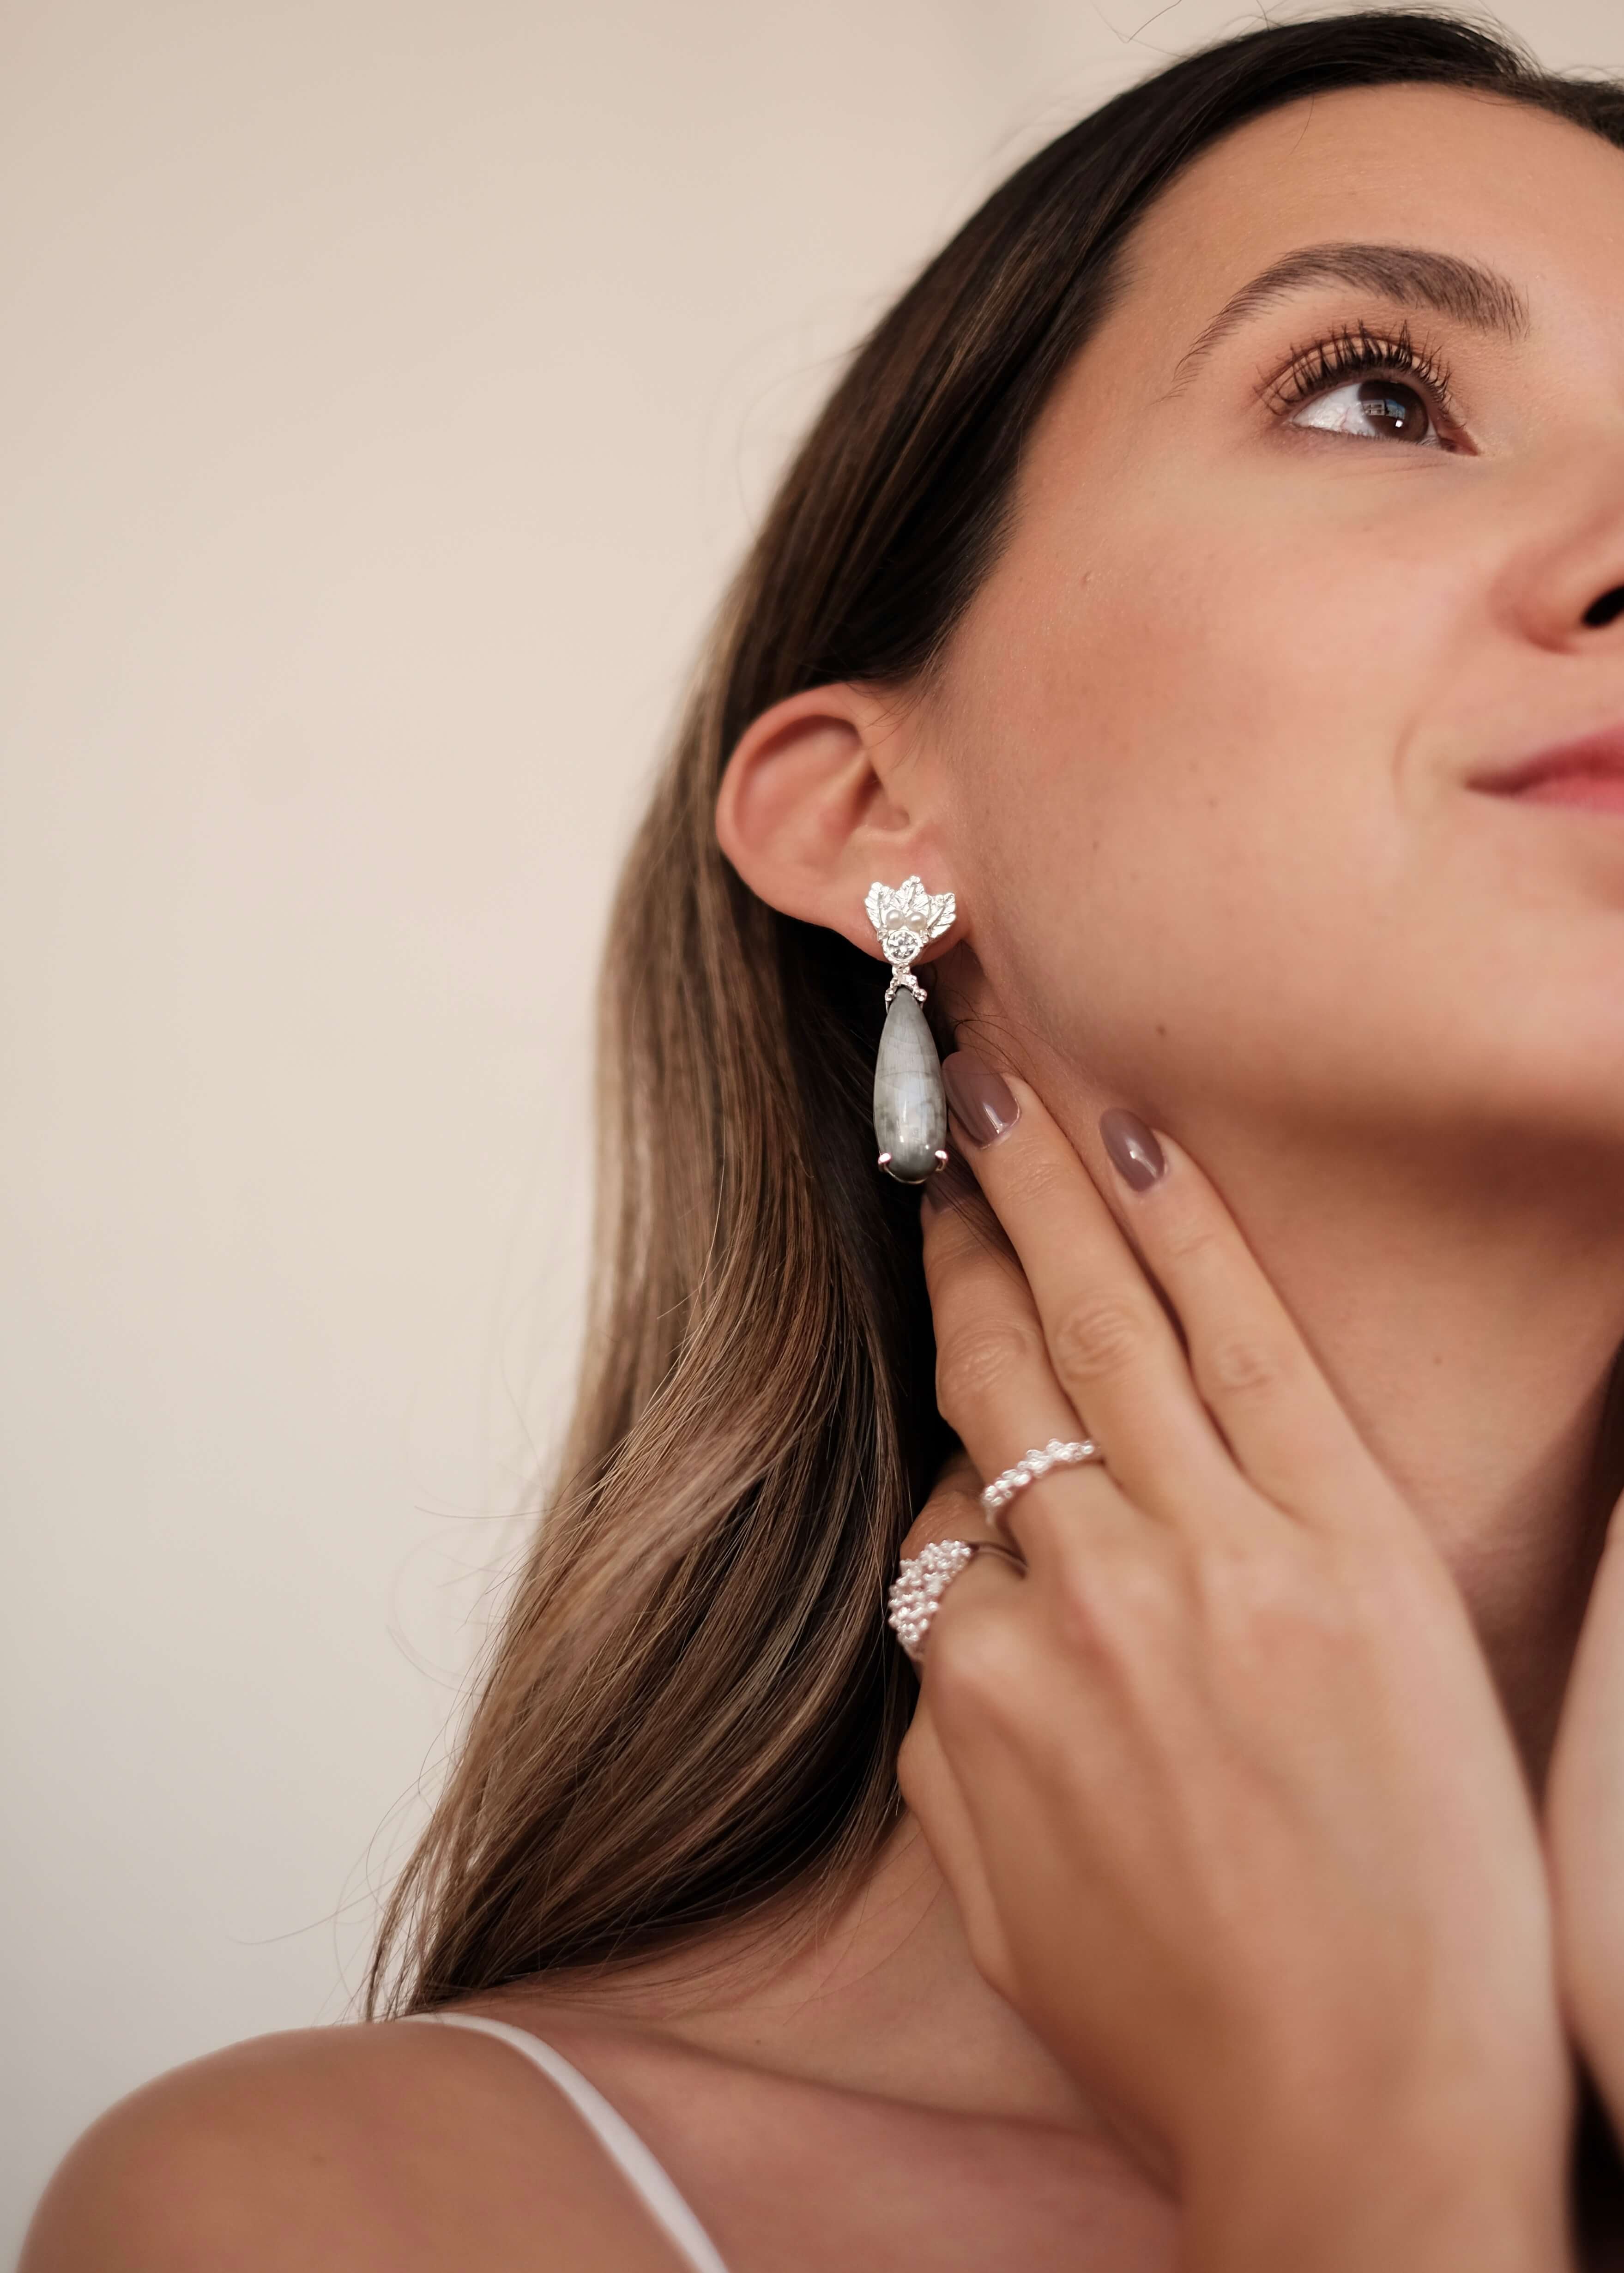 A woman wearing a pair of The Muse III Toed eye earrings with natural drop-shaped gemstones by Cremilde Bispo Jewellery.